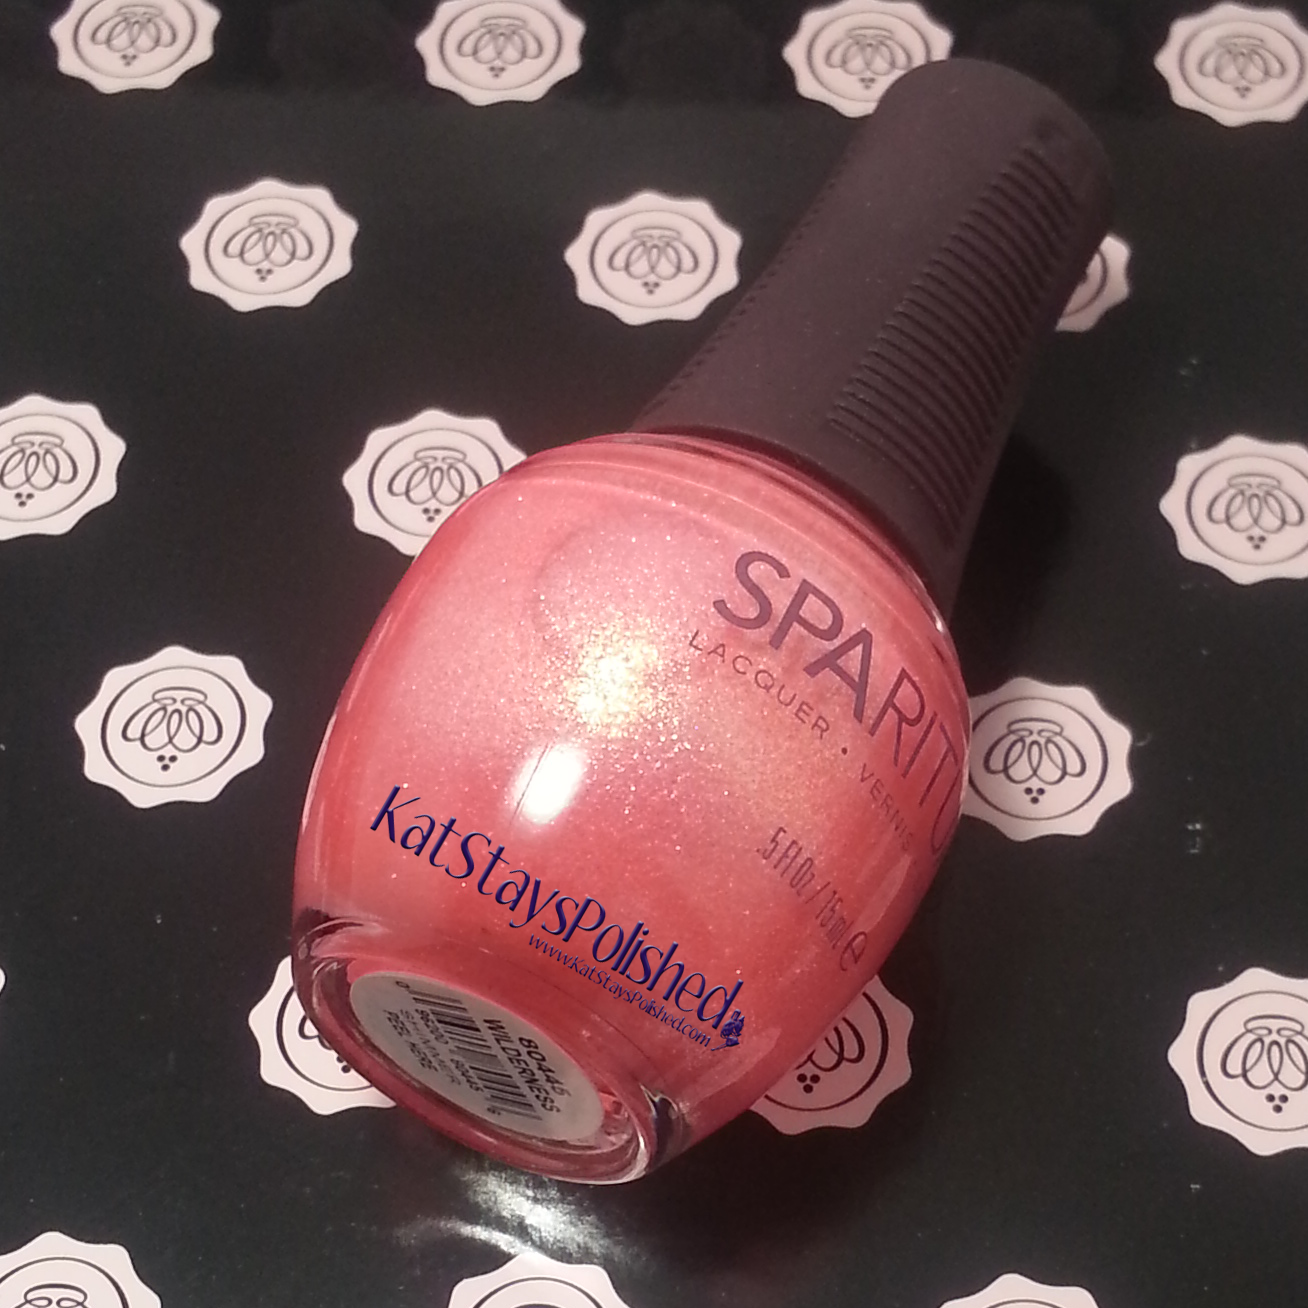 Glossybox - August 2014 - Sparitual Nail Lacquer - Wilderness | Kat Stays Polished